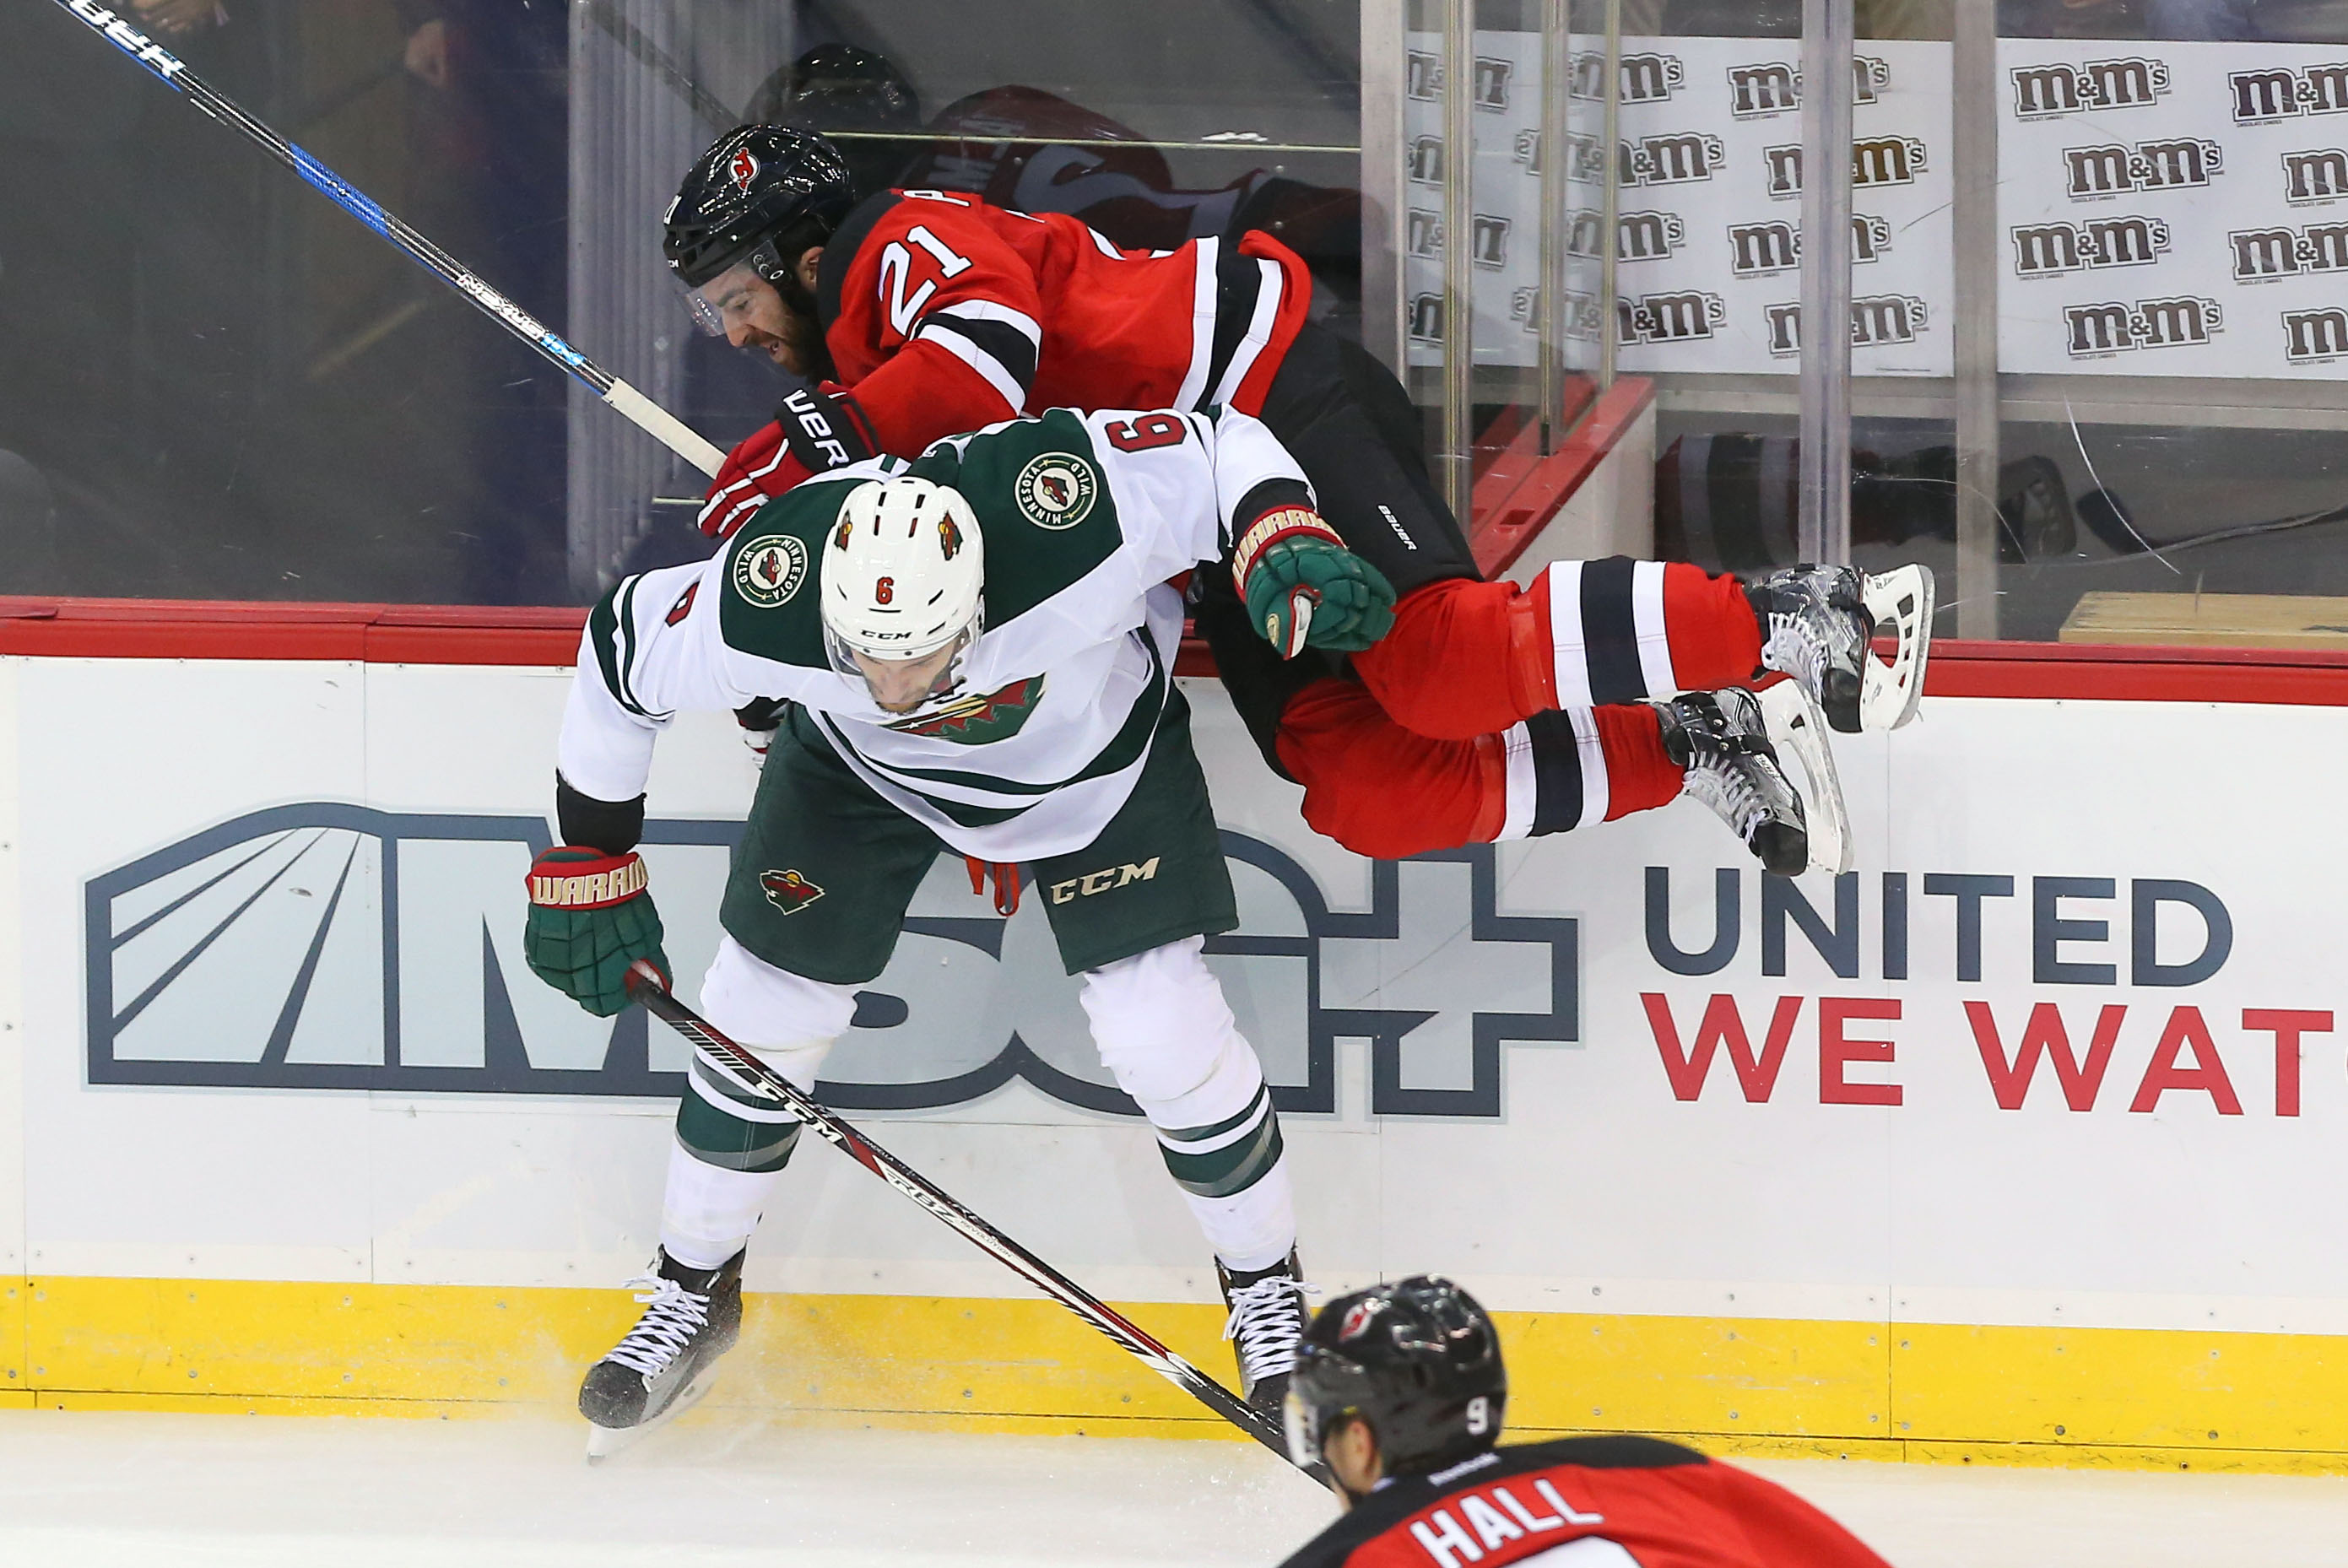 New Jersey Devils road trip concludes against Staal, Minnesota 